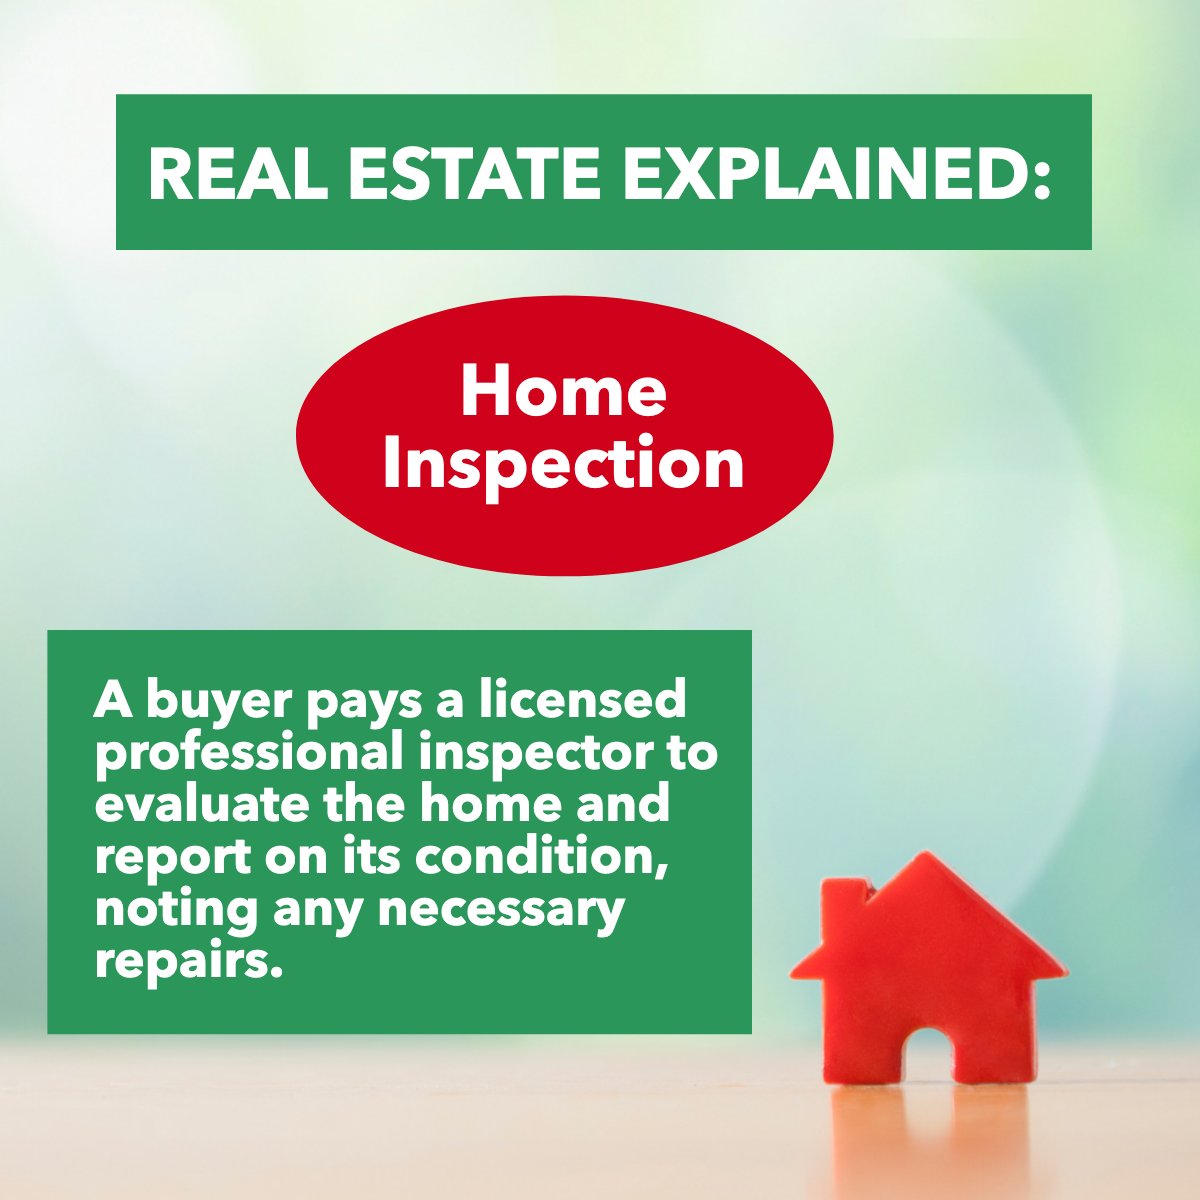 Real Estate Explained: 'Home Inspection' 

Have you had any experience with home inspections? 🤔

#realestateadvisor #homeinspectiontime #homeinspections #realestate101 #facts
 #RacingRealEstateAgent #BarrettRealEstate #StoneTreeRealEstateTeam #maricopaazrealestate